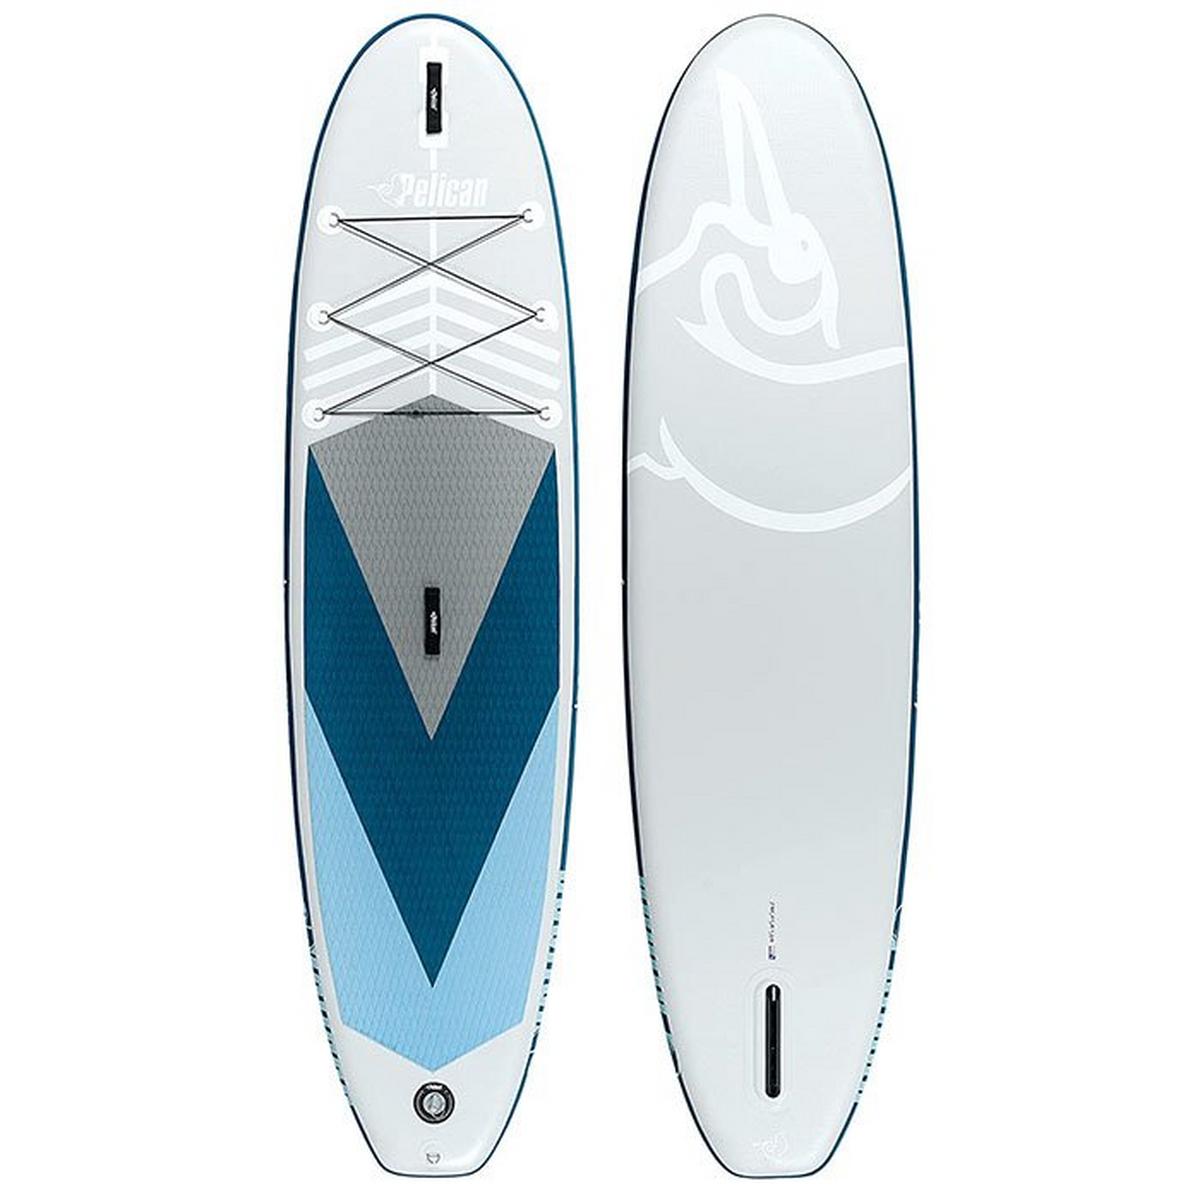 Boracay 10'4" Inflatable Stand Up Paddleboard